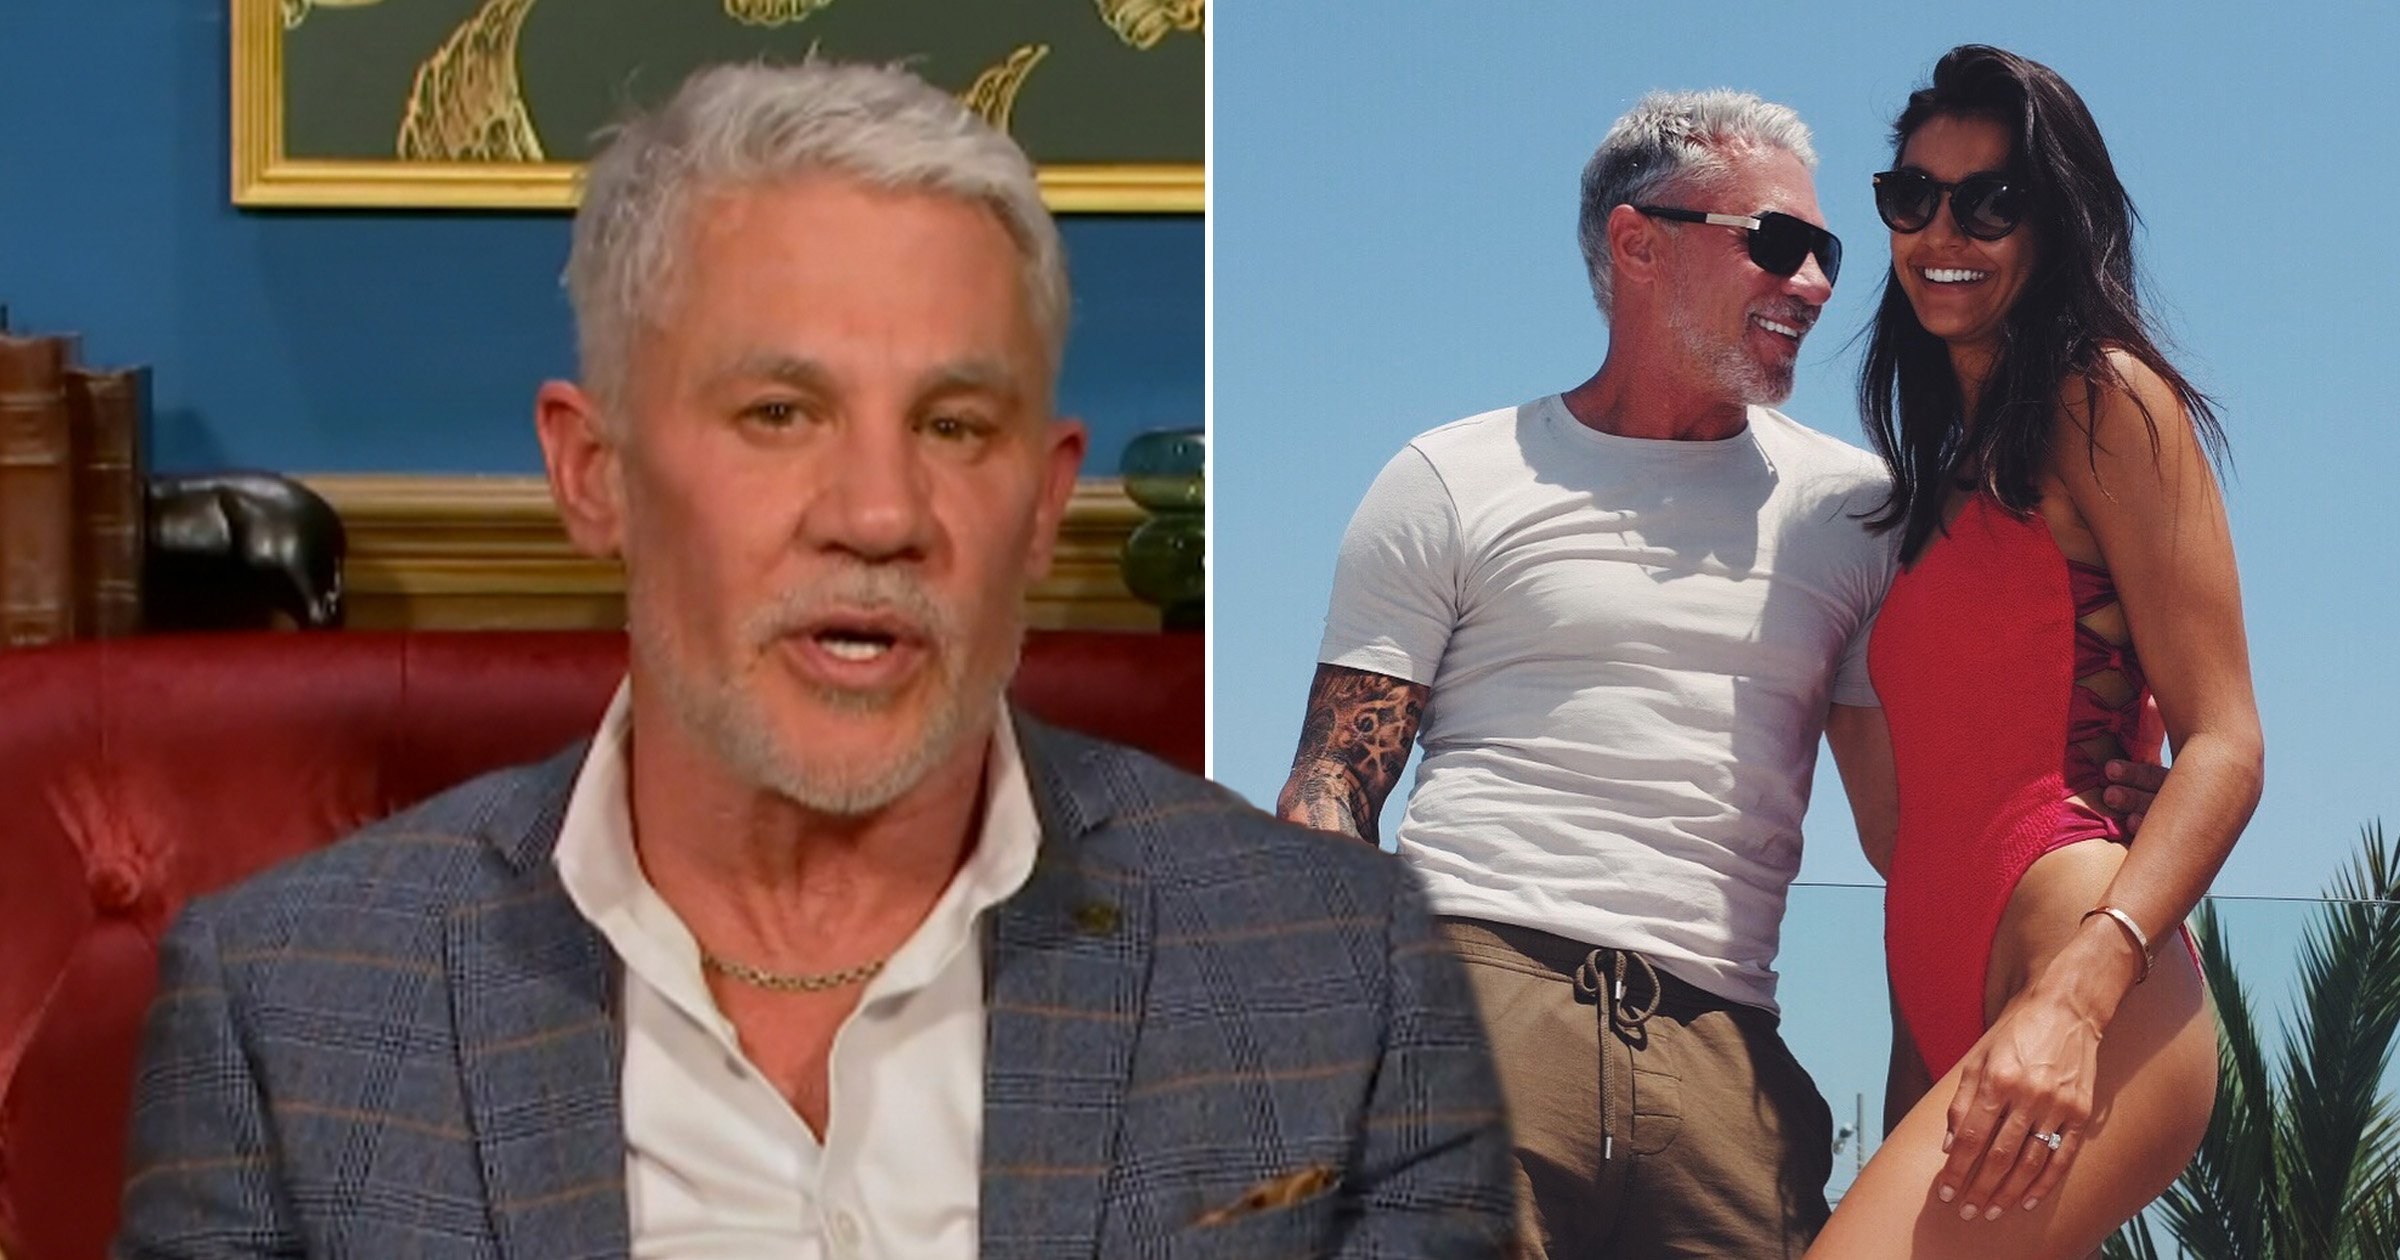 Wayne Lineker breaks down in tears on Celebs Go Dating after experts Anna Williamson and Paul Carrick Brunson dig into his past